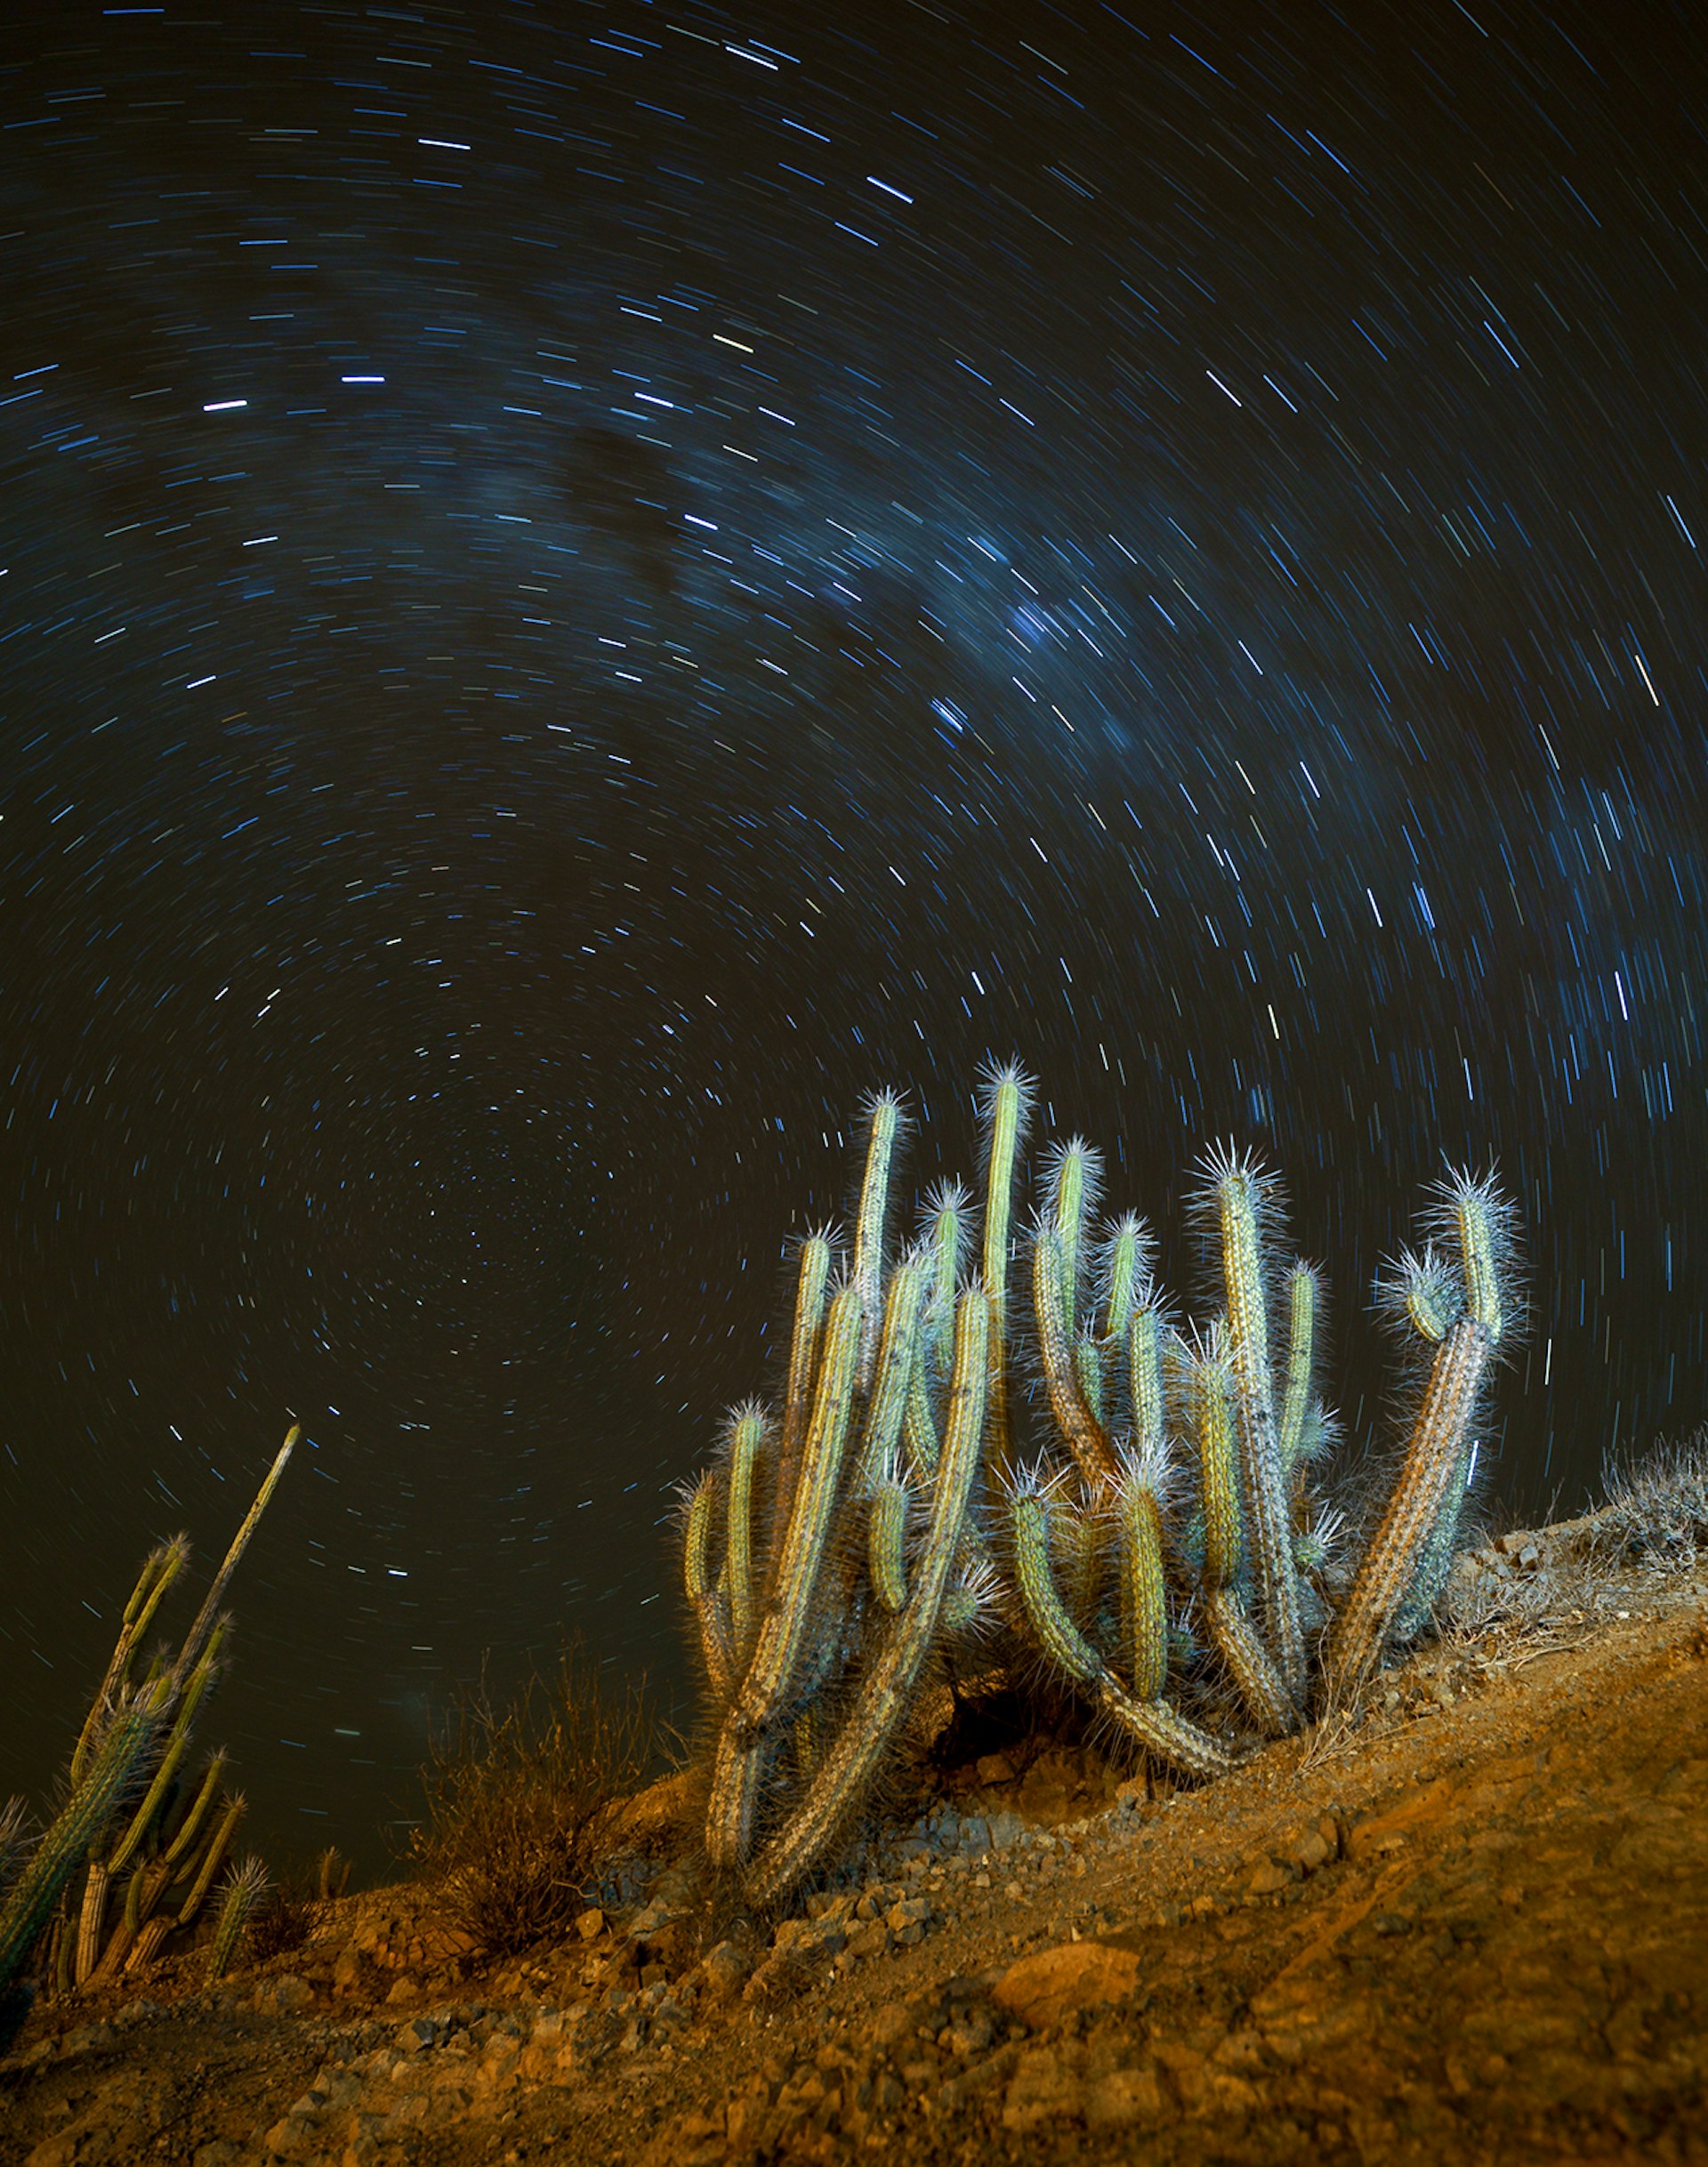 A long-exposure image of the stars spinning in the sky with a cactus in the foreground © Hortega / Getty Images